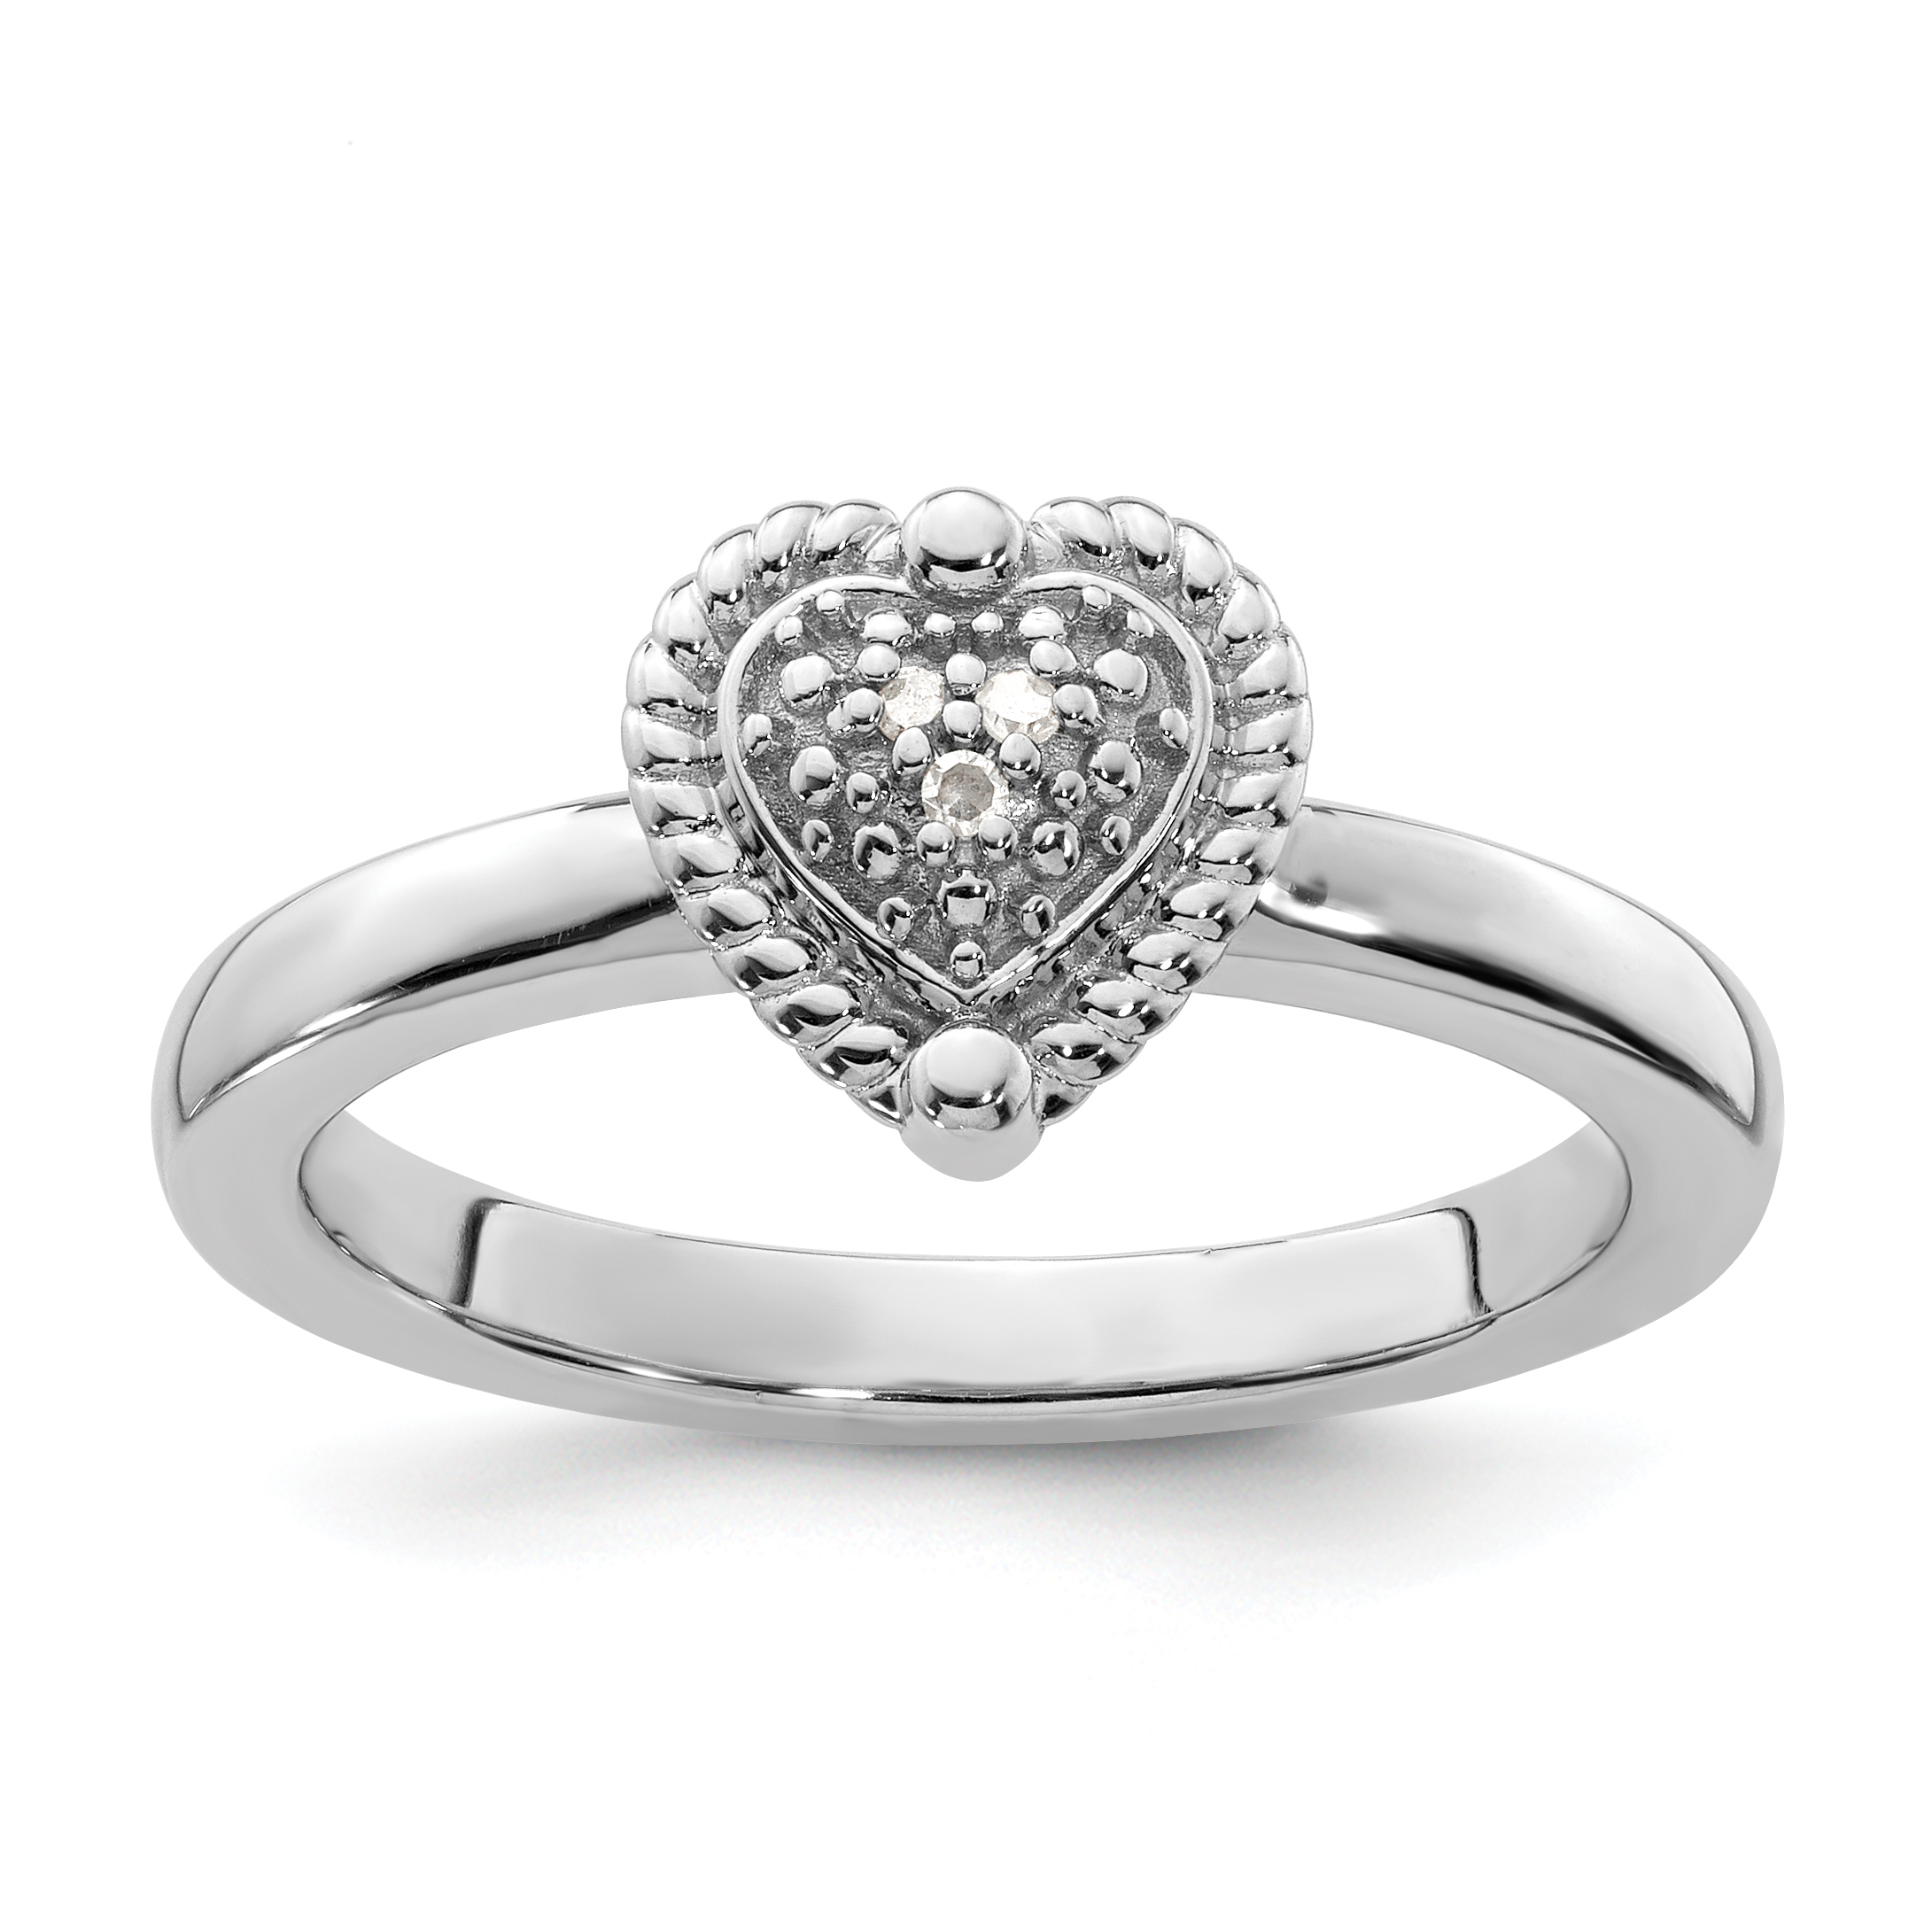 Stackable Expressions Sterling Silver Stackable Expressions Heart Diamond Ring